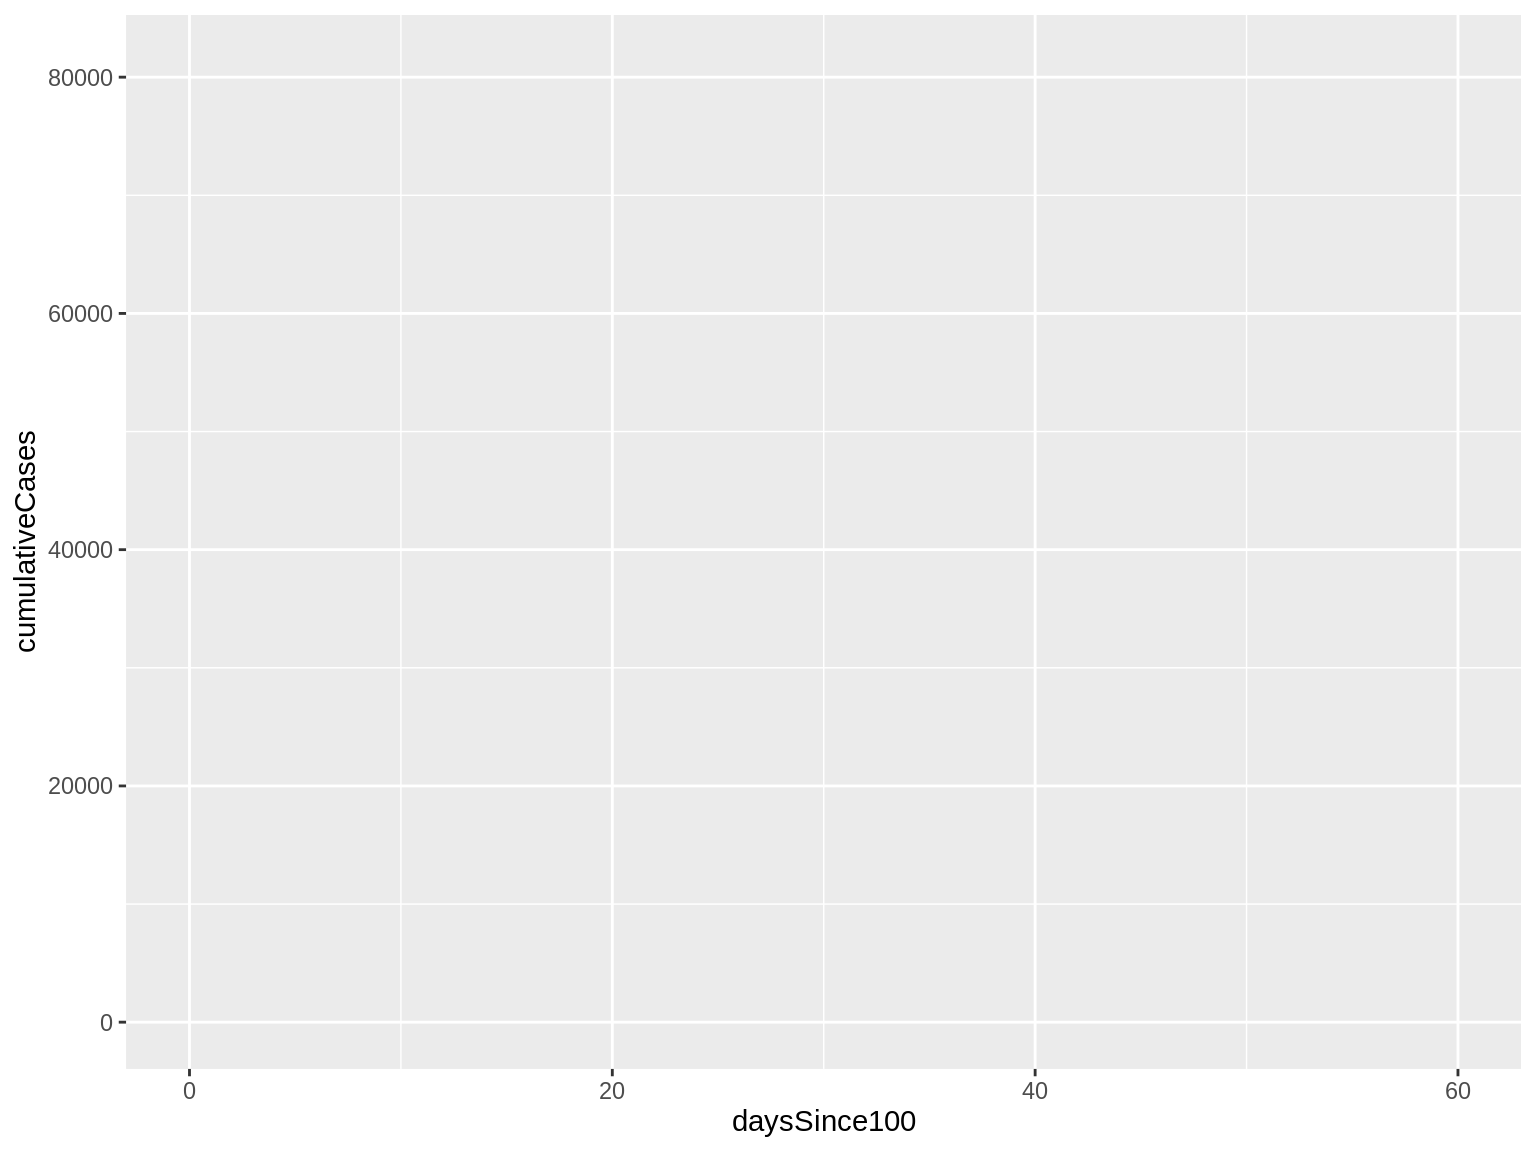 A ggplot with just a base layer